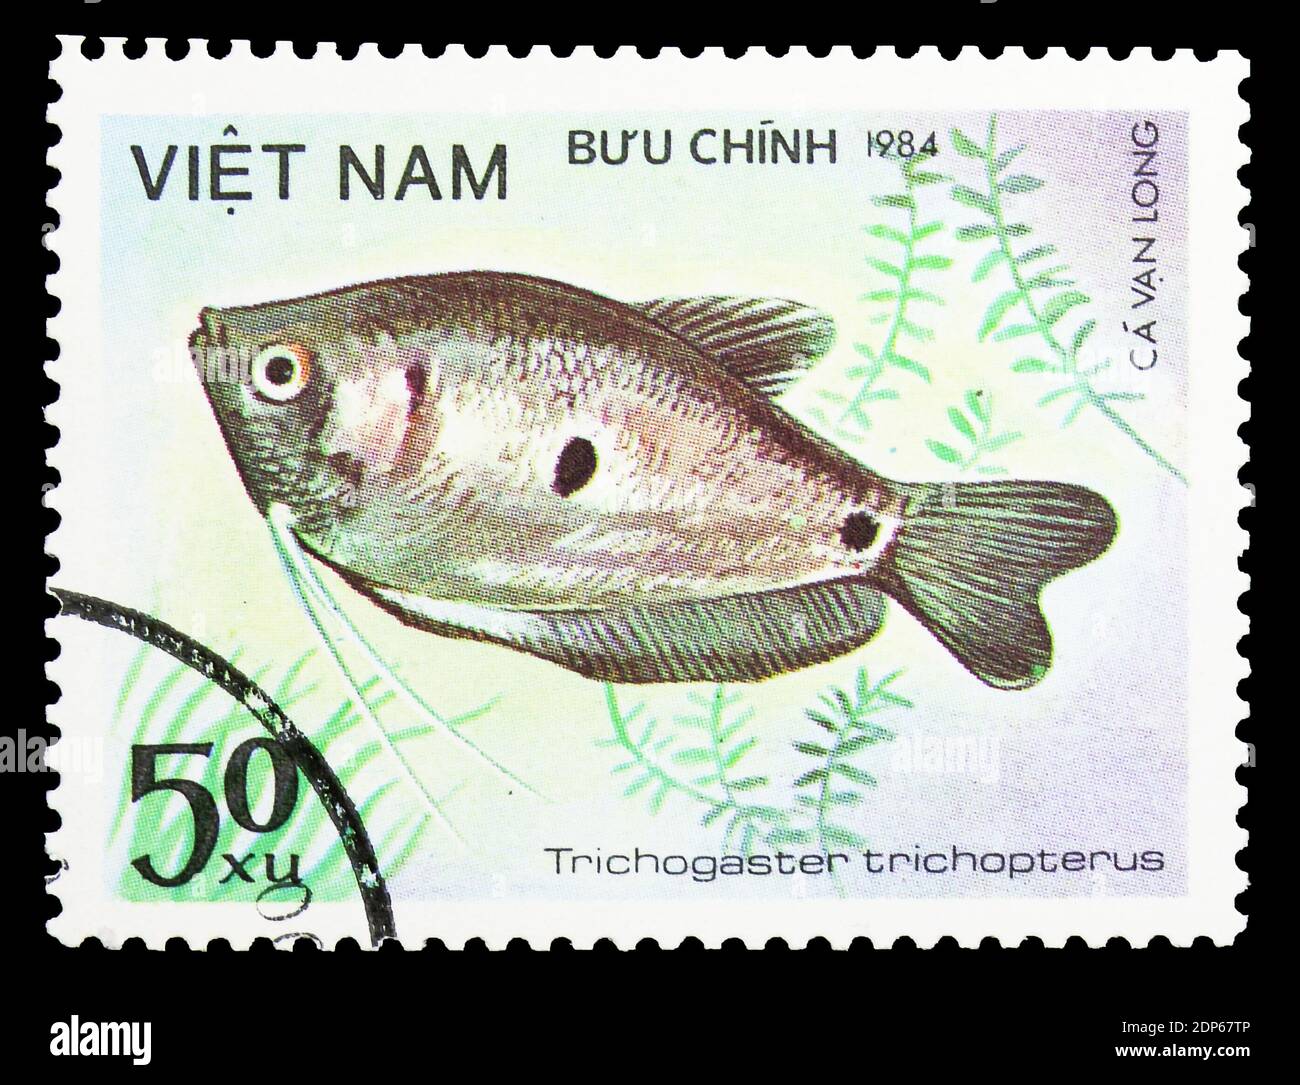 MOSCOW, RUSSIA - SEPTEMBER 26, 2018: A stamp printed in Vietnam shows Gold Gourami (Trichogaster trichopterus), Fish - Ornamental serie, circa 1984 Stock Photo